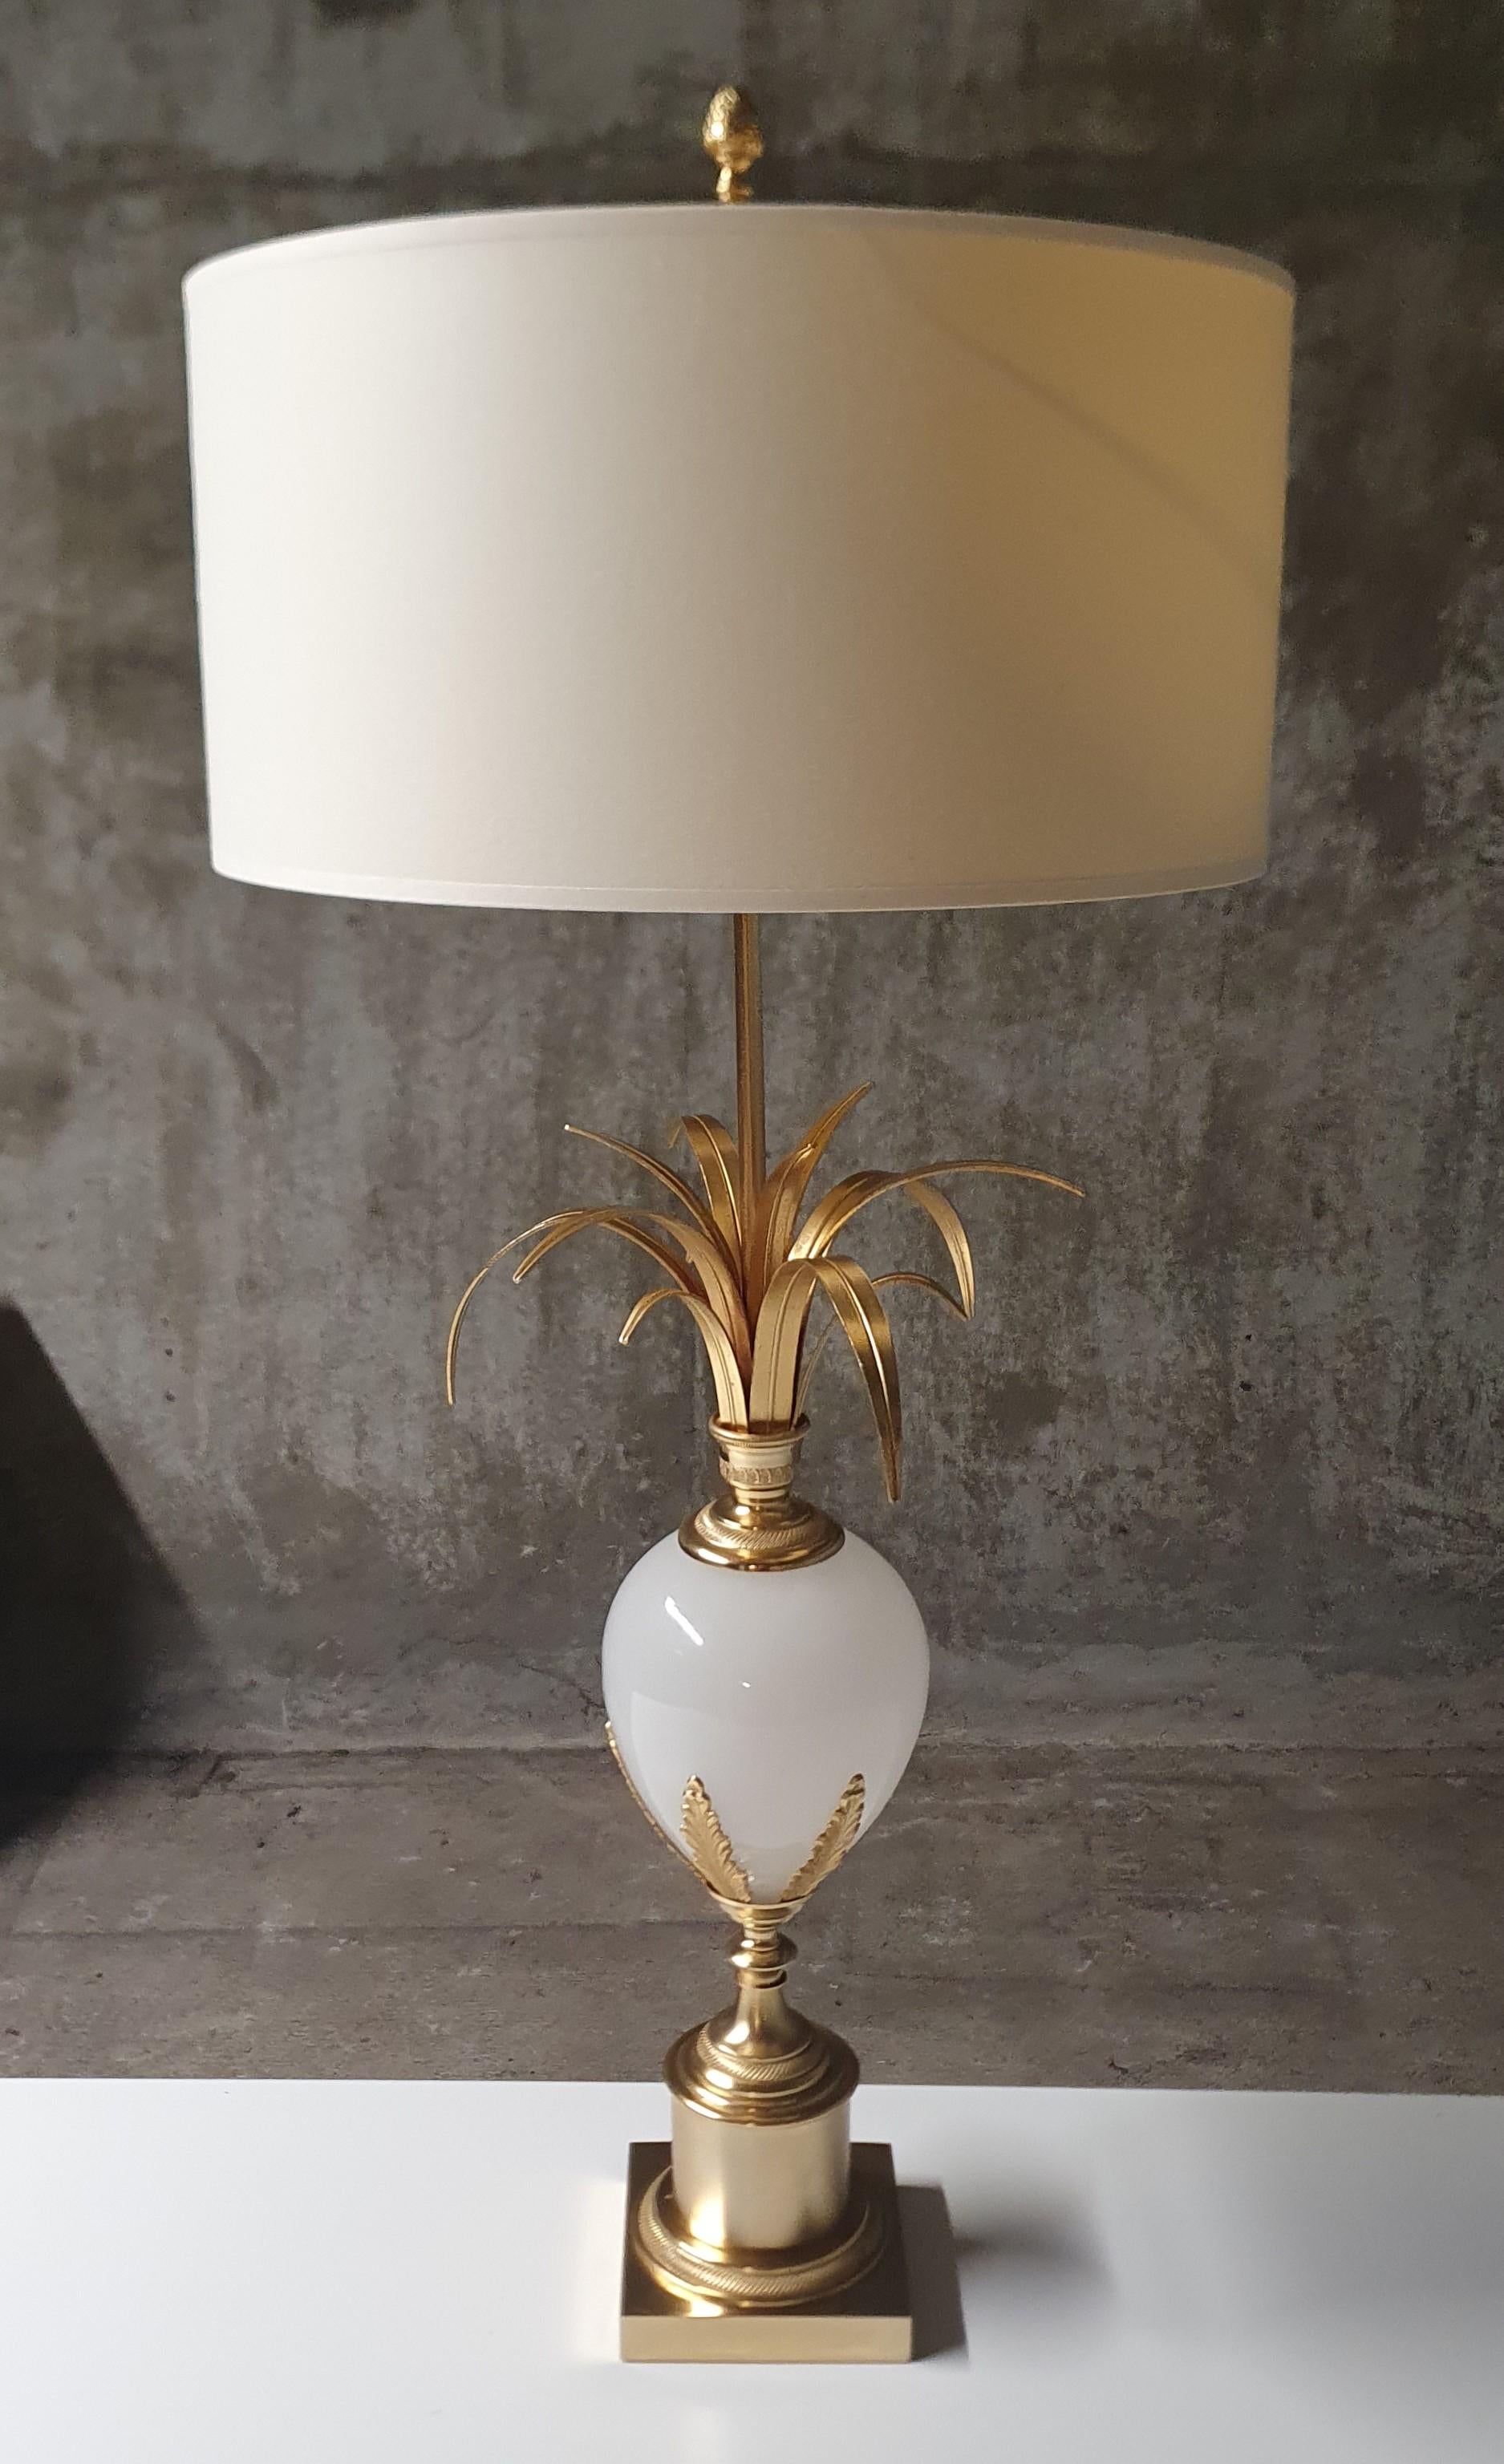 This is a beautiful Classic Table Lamp by the renowned French manufacturer S.A. Boulanger in exceptionally good condition

Made of hand cast and carved Bronze and Brass in combination of Matt and Shiny plated Gold finish and features the companies